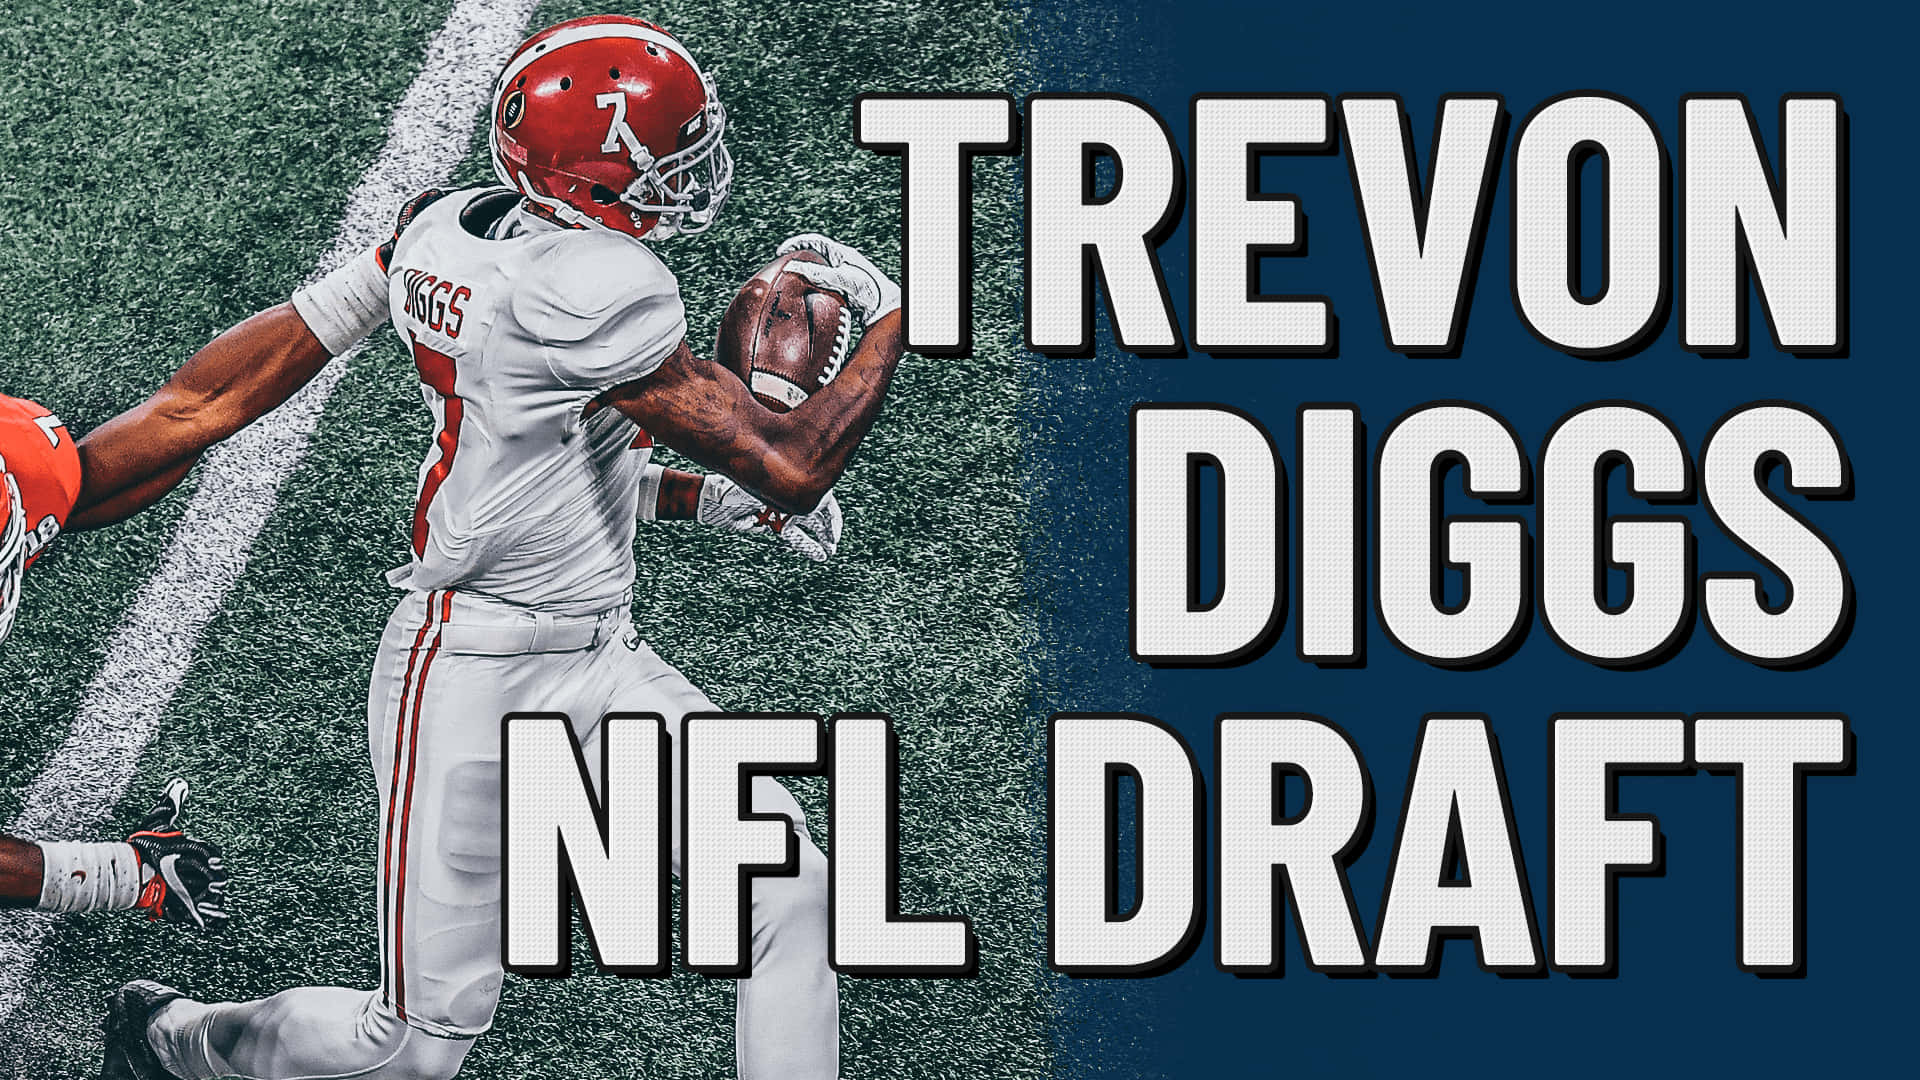 Trevon Diggs is Ready for NFL Stardom Wallpaper